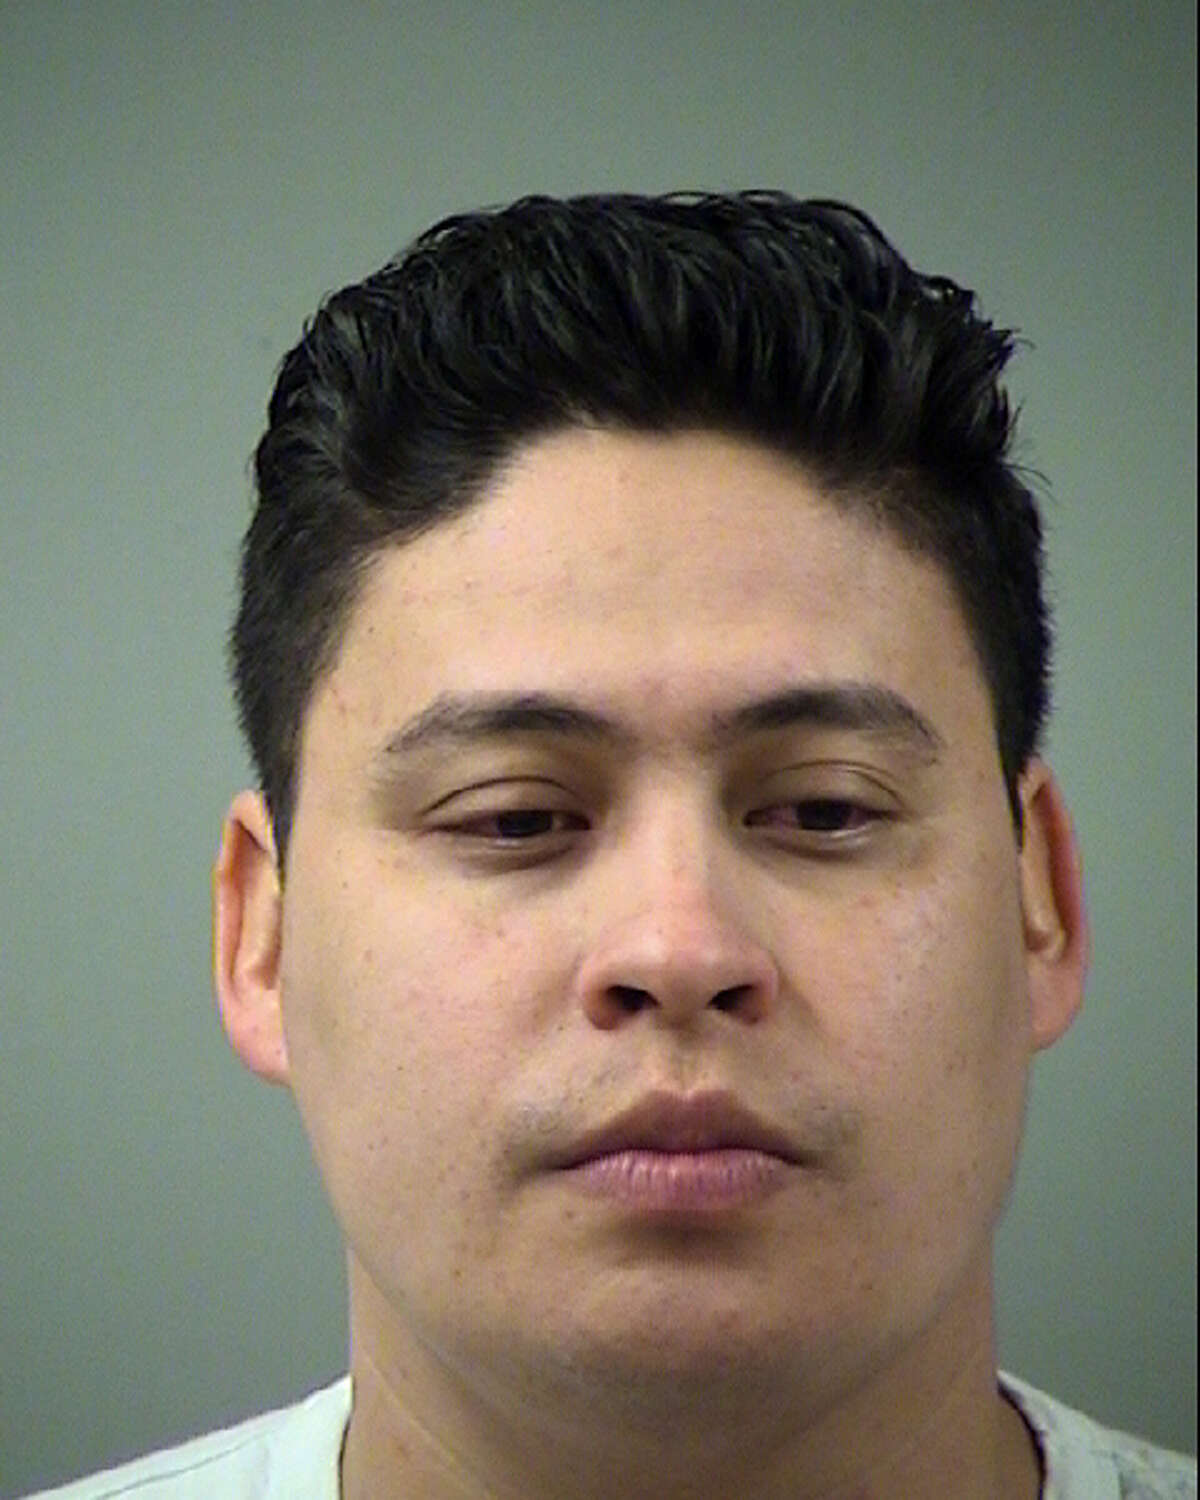 Johnathan Solarte, 31, was booked into the Bexar County Jail on a charge of evading arrest, a third-degree felony.